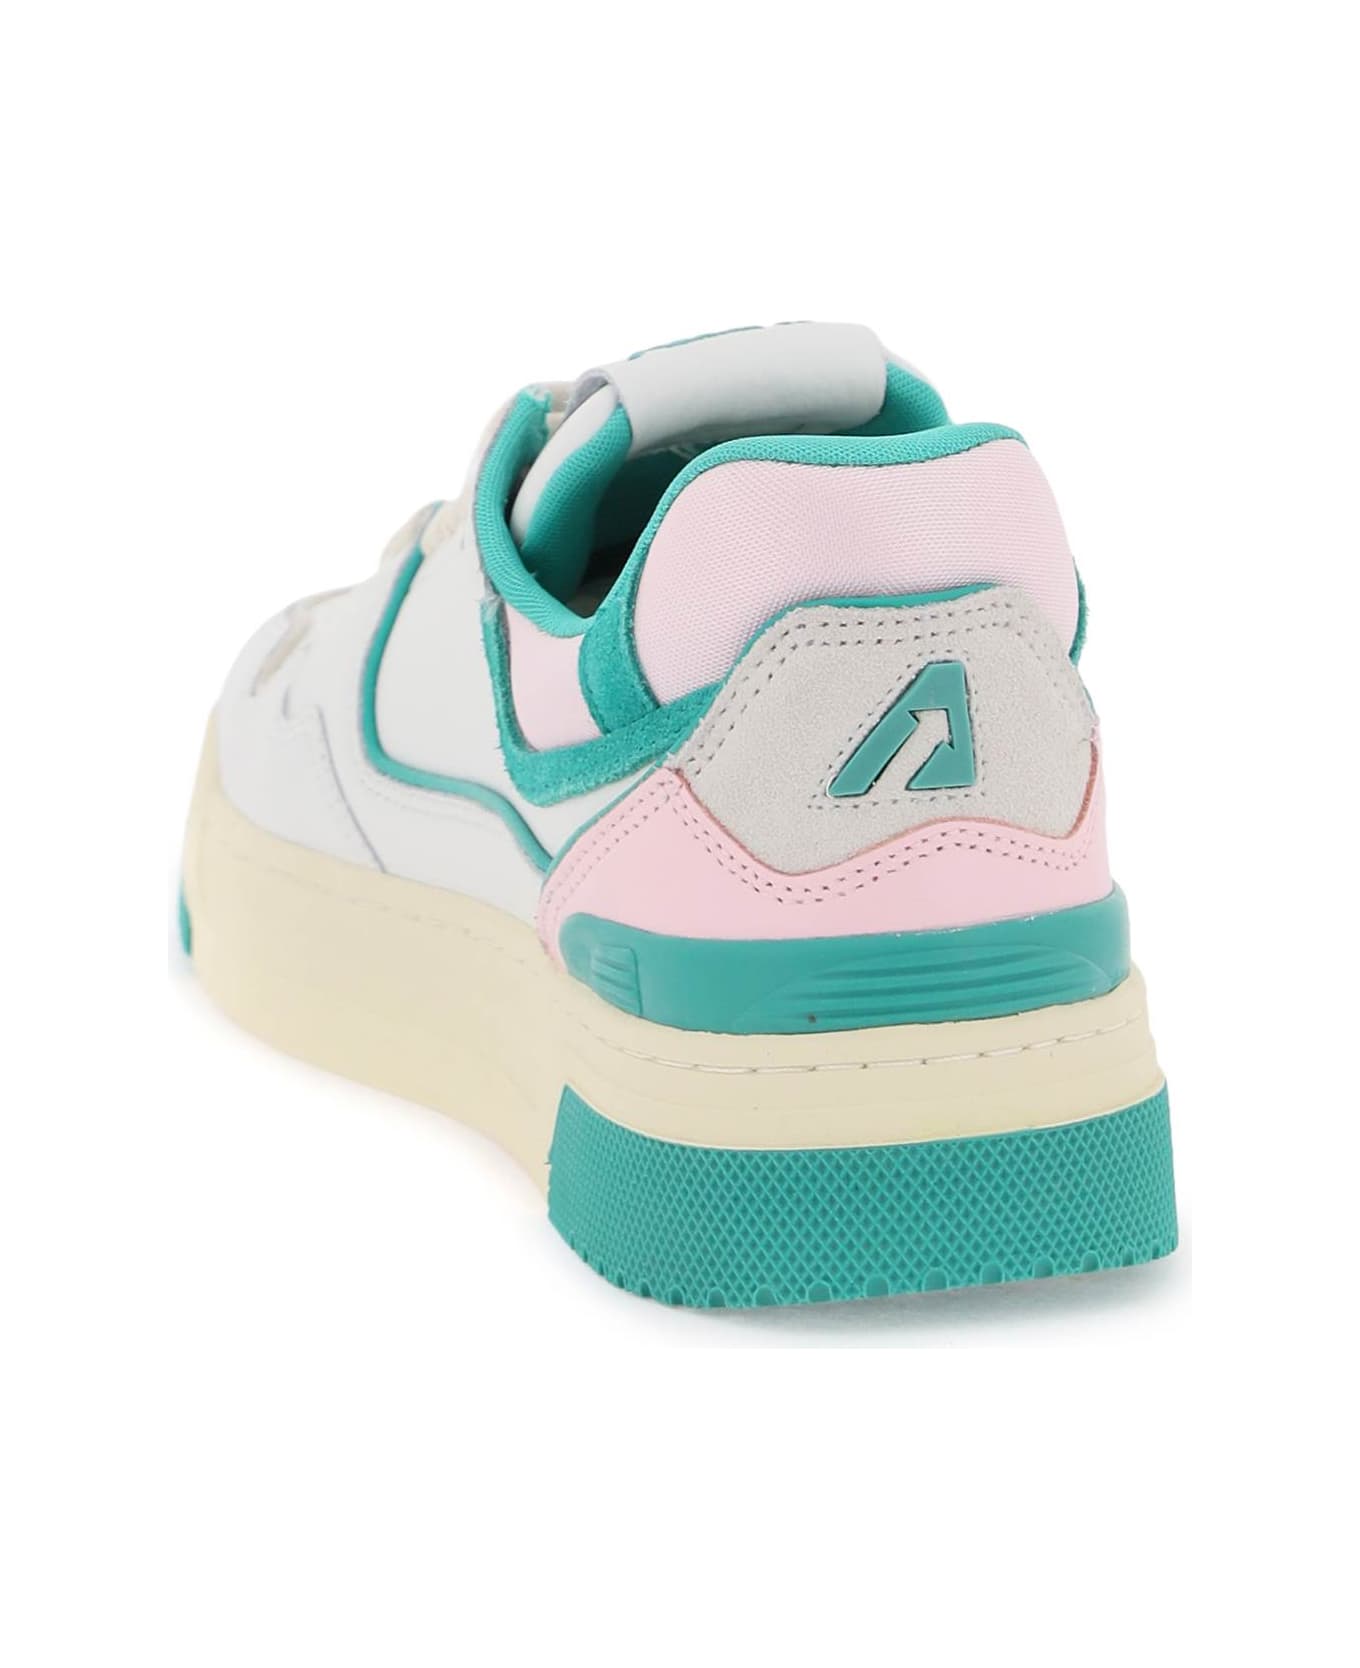 Autry Clc Sneakers In White And Green Leather - White